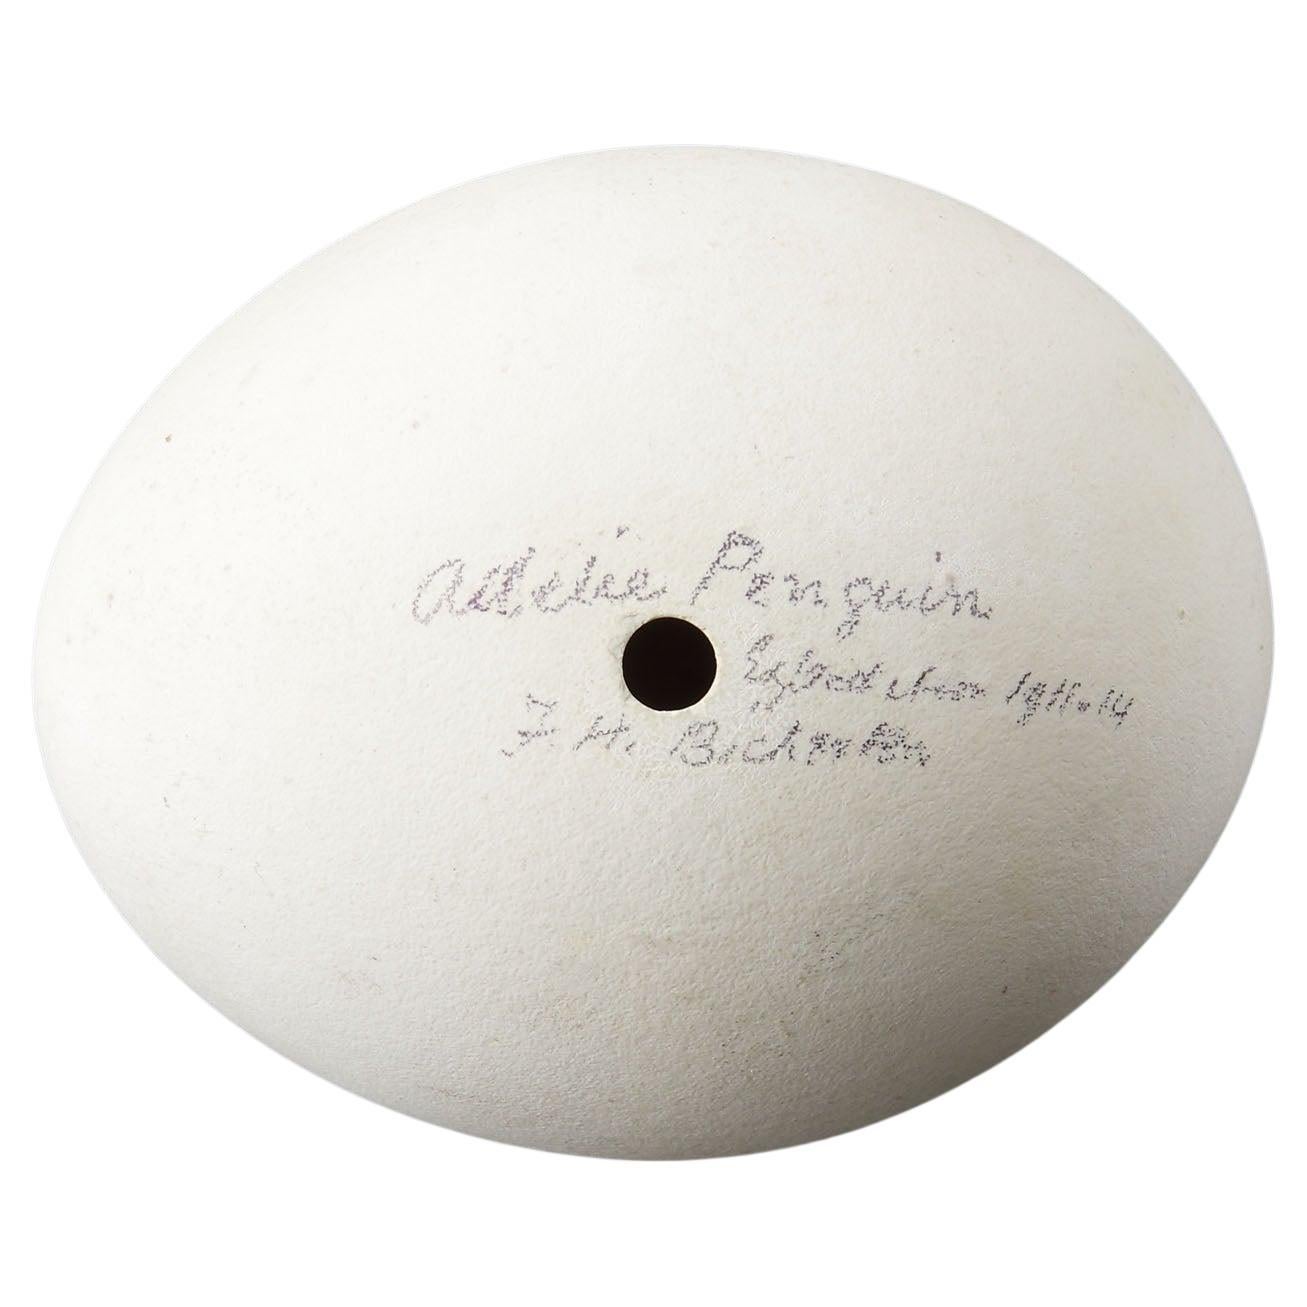 A Rare ‘Adelie’ Penguin Egg from the Australian 1911-14 Expedition